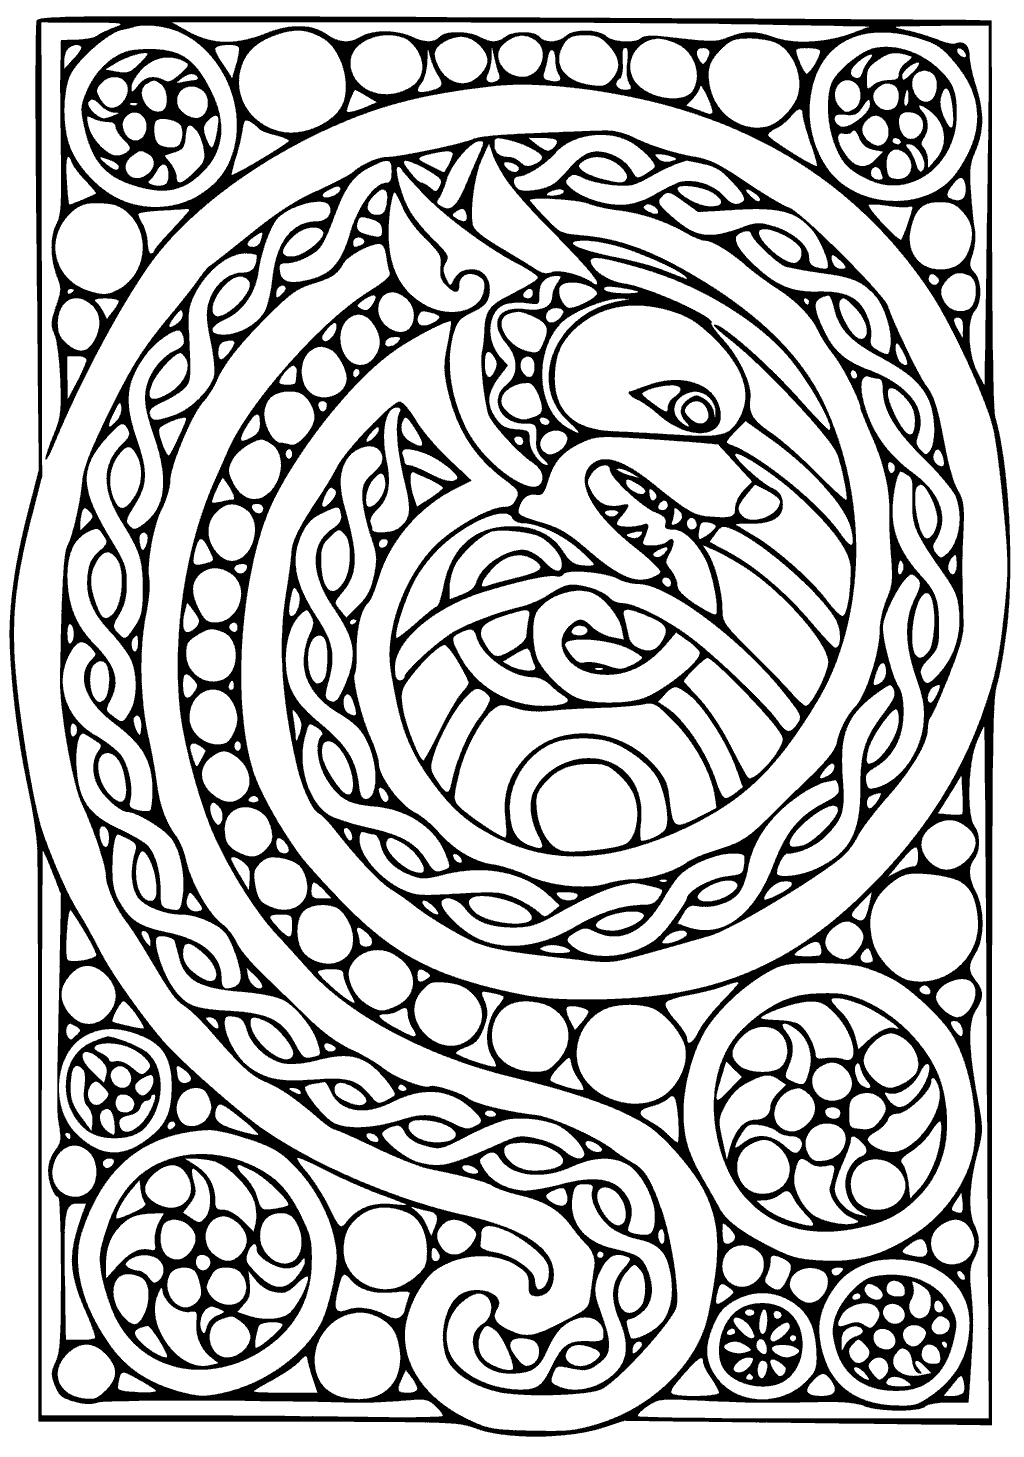 Celtic Coloring Pages - Best Coloring Pages For Kids